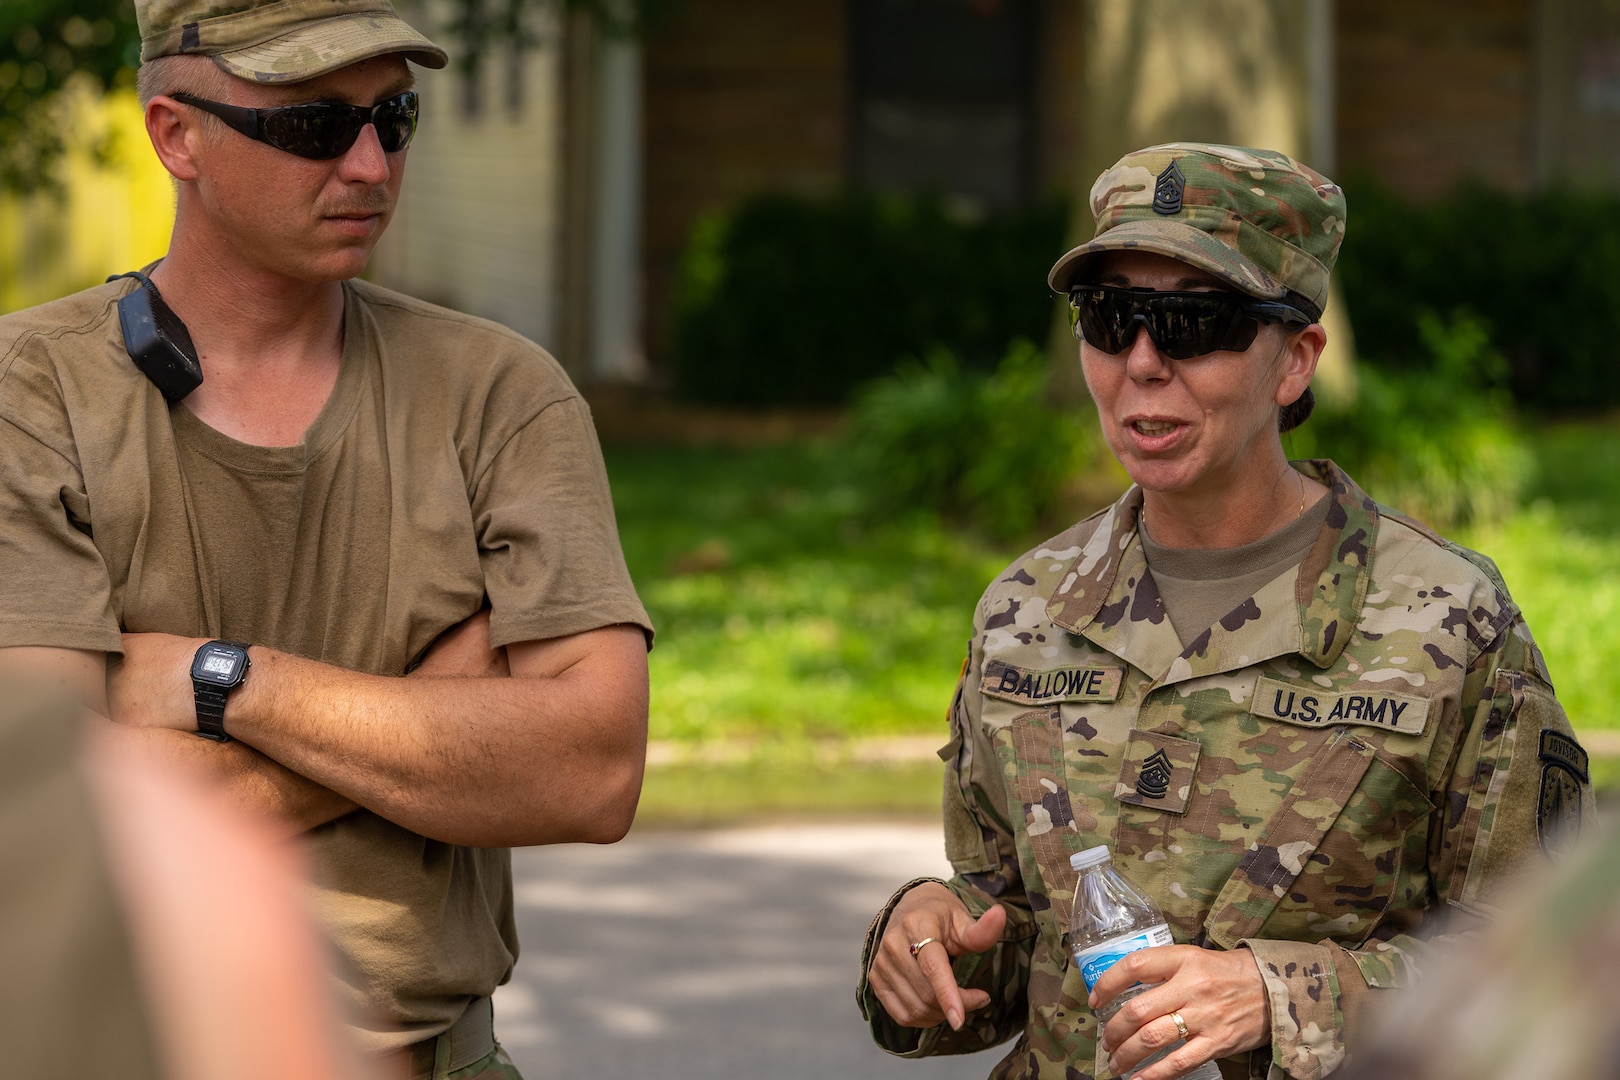 Illinois National Guard Senior Enlisted Leader Command Sgt. Maj. Dena Ballowe visited troops serving on flood duty on June 26, 2019 in East Cape Girardeau, Illinois. The leadership team asked Soldiers how they were doing and if they needed anything else to complete the mission. Brig. Gen. Rich Neely, the Adjutant General of Illinois and Commander of the Illinois National Guard, and Ballowe also took some time to place some sandbags with the troops as well during their visit. Ballowe retired Oct. 31 after 32 years of service in the Illinois Army National Guard.